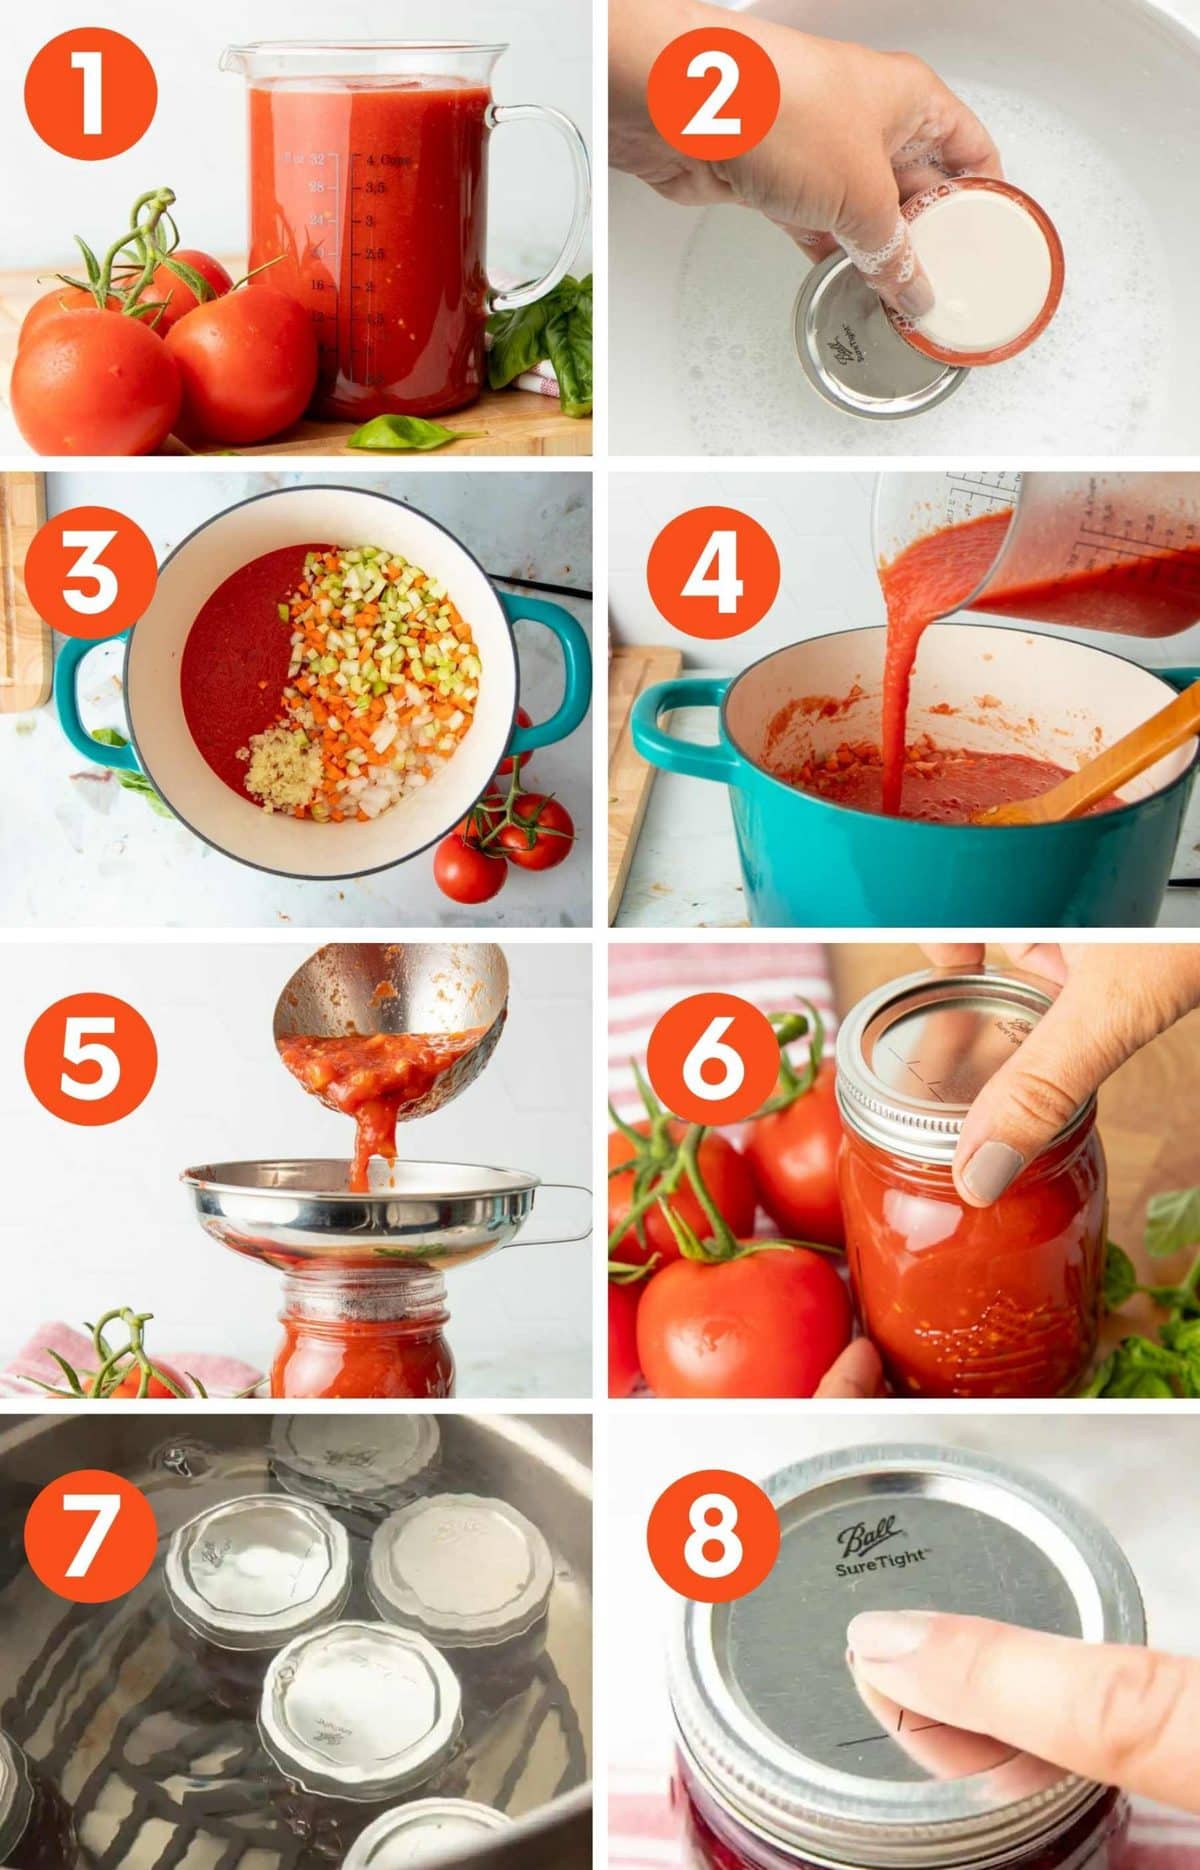 Collage of images showing the steps for canning spaghetti sauce